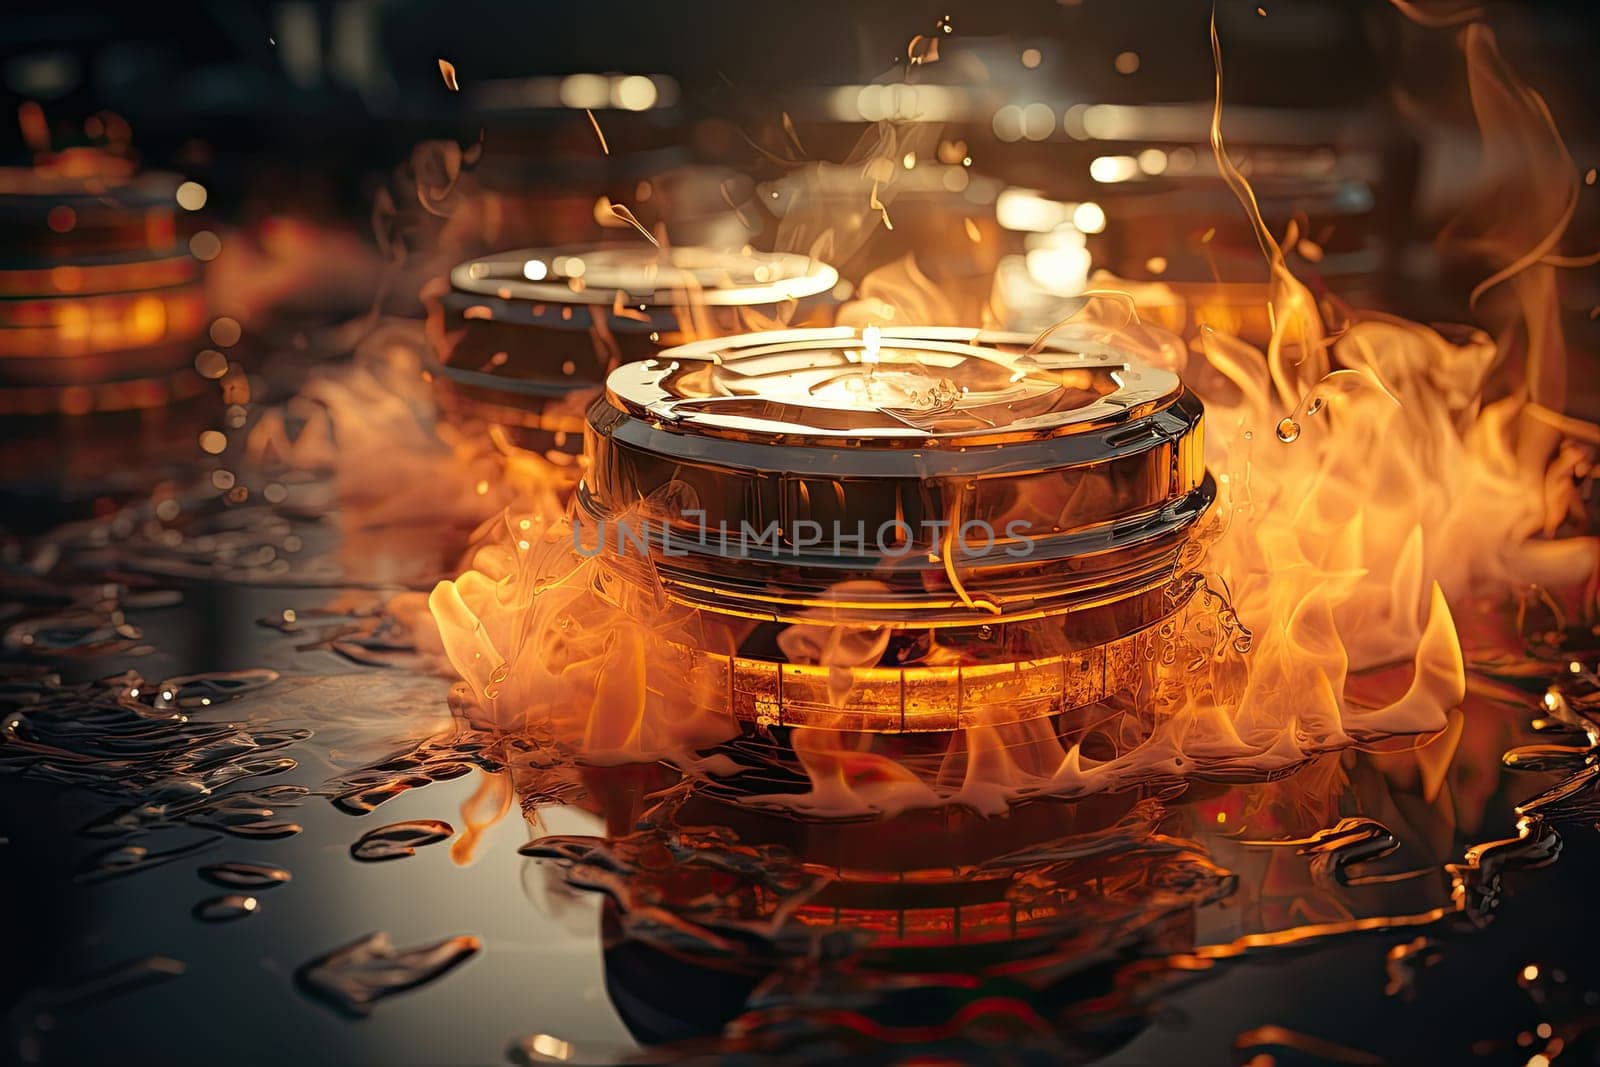 A Captivating Close-Up of a Fiery Jar with Mesmerizing Flames Dancing Inside